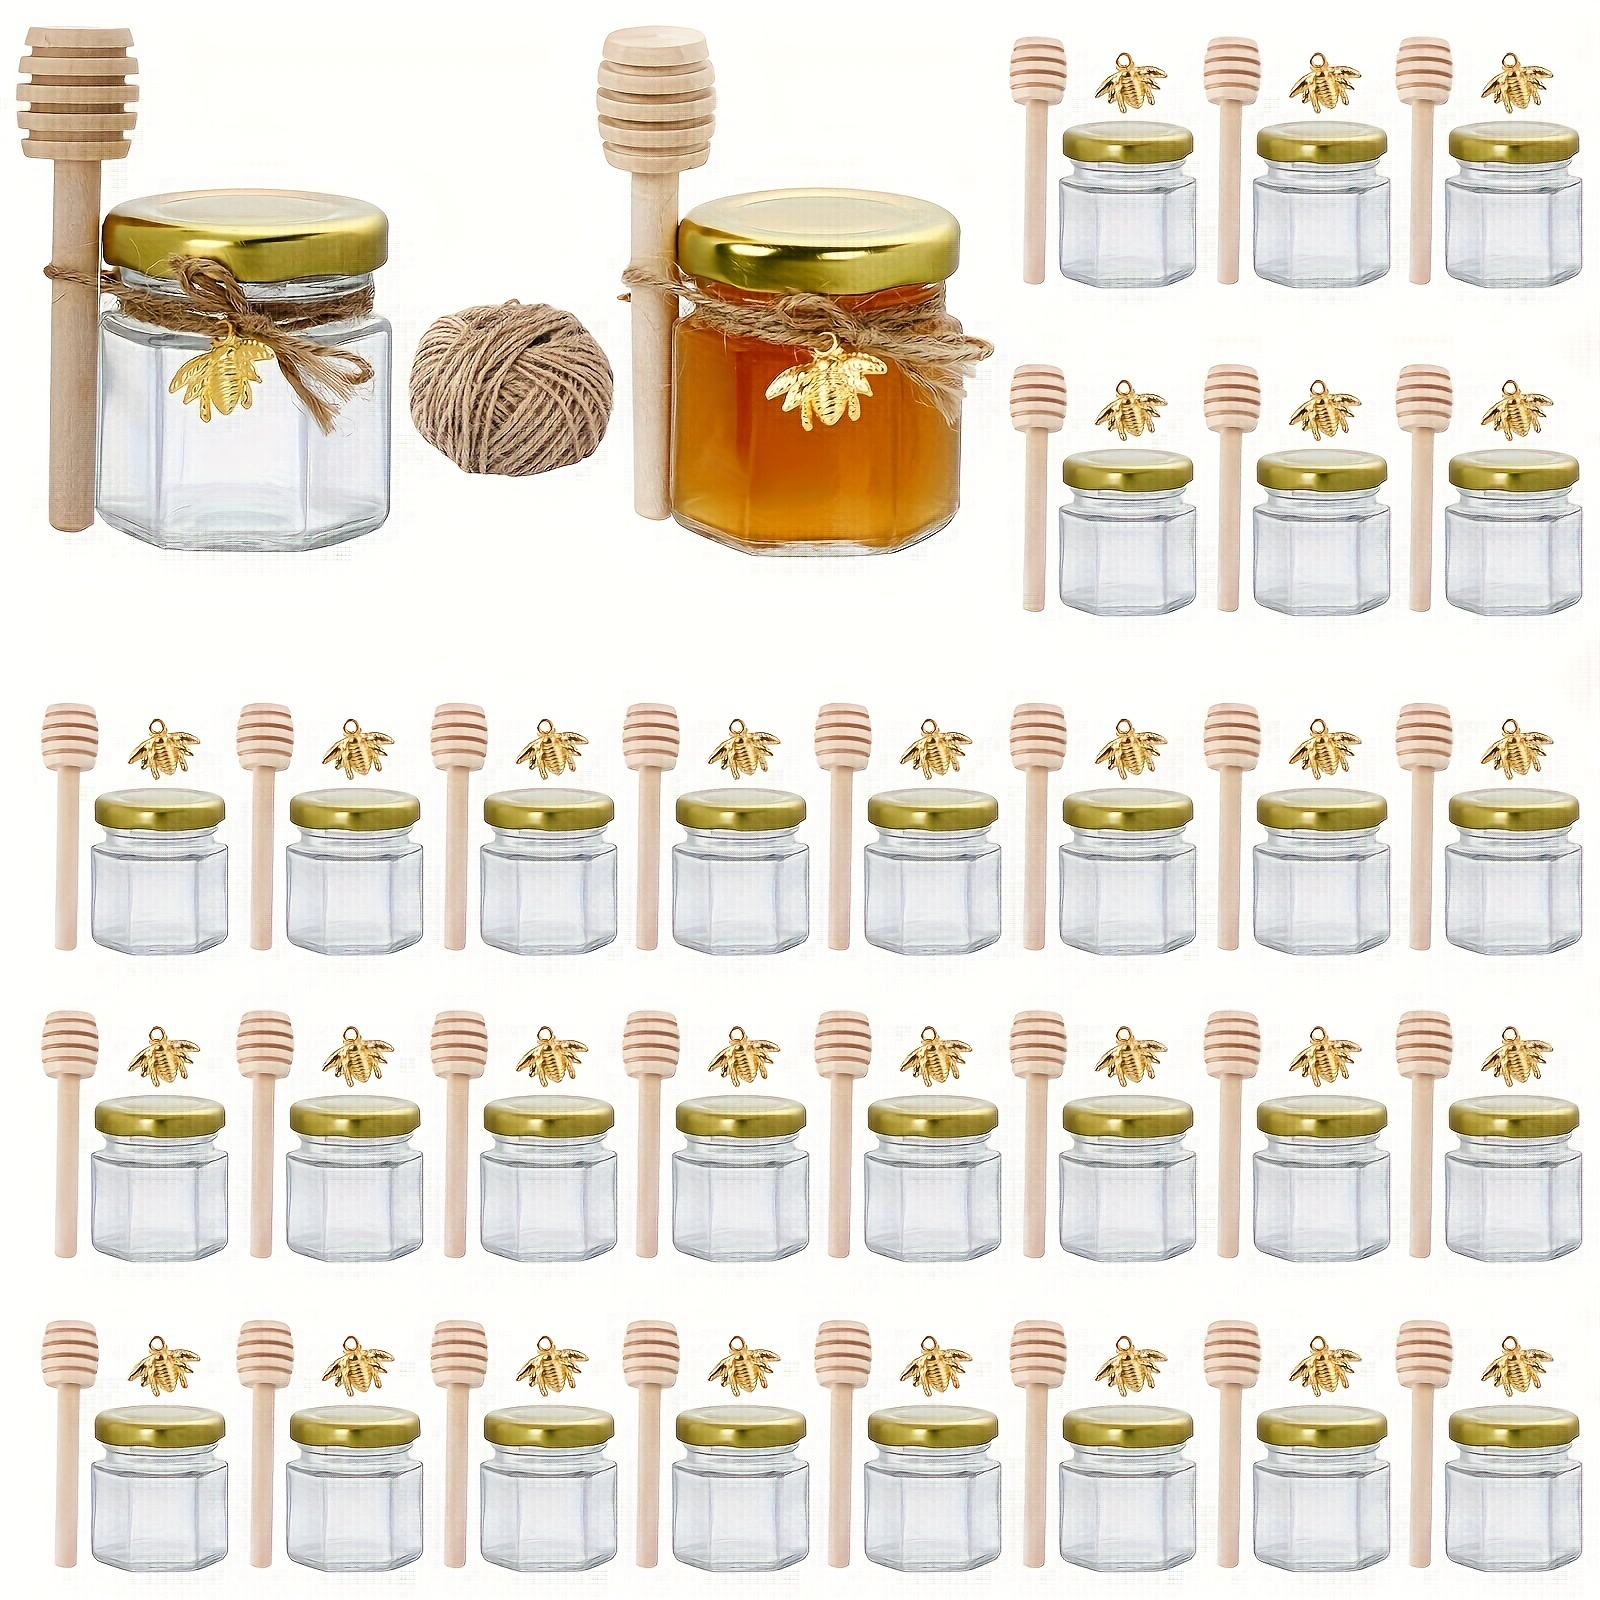 

20/30/50/60pcs, Elegant Hexagonal Mini Glass Jar With Golden Lid And Wooden Sticks, Perfect For Jam Preservation And Parties - Creative Glass Transparent Jar For Honey, For Weddings And Bridal Gifts